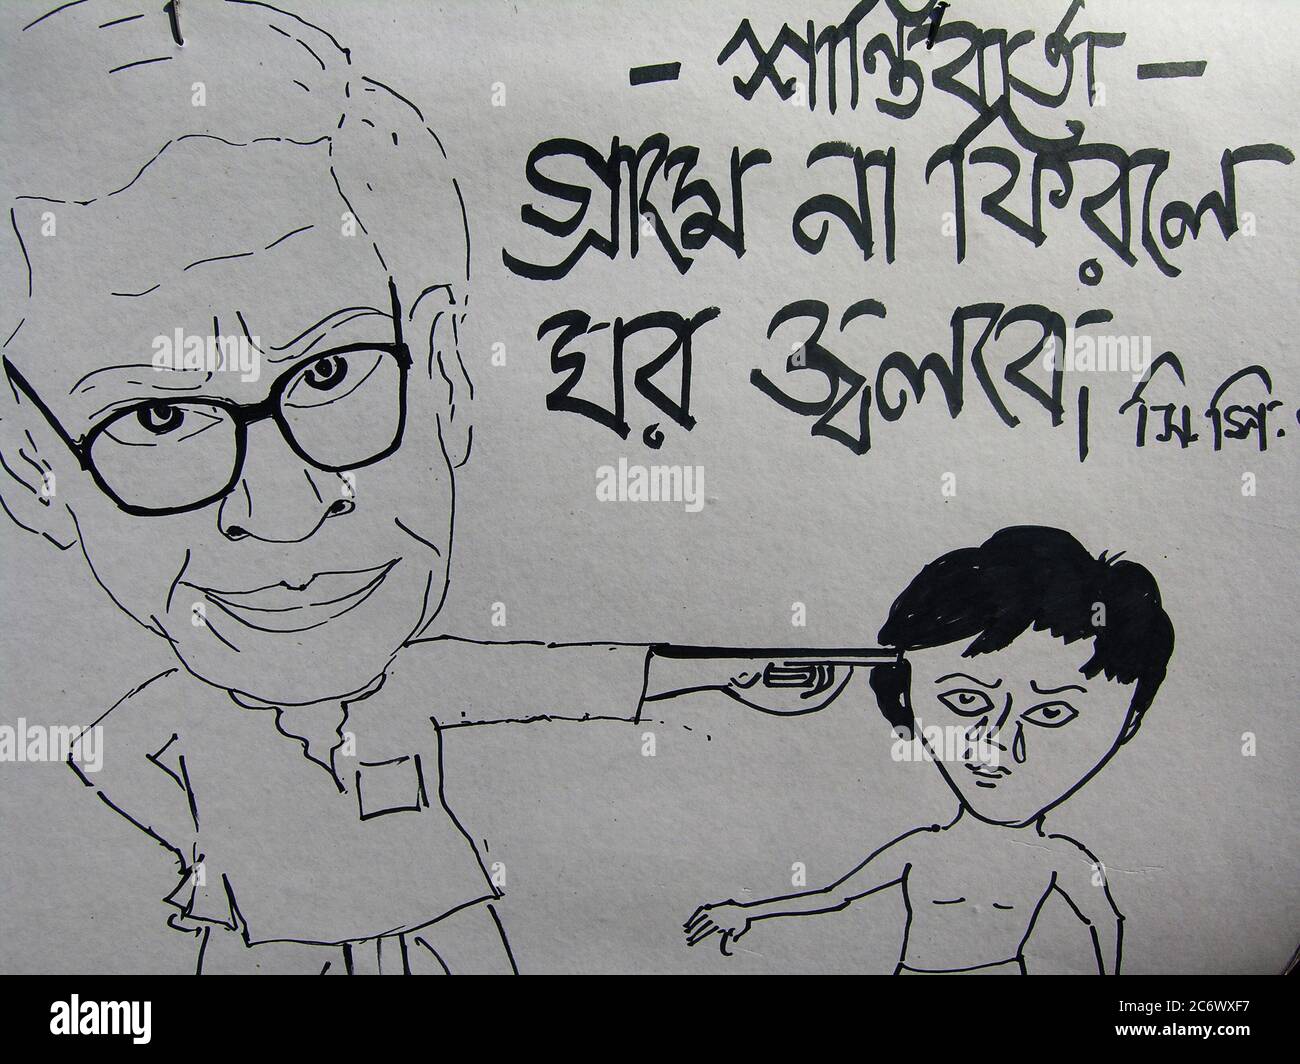 A poster used during the protest against the brutality in Nandigram. Kolkata, India. November 14, 2007. In 2007 the West Bengal government decided to allow ‘Salim Group’, an Indonesian conglomerate, to set up a chemical hub at Nandigram under the ‘Special Economic Zone’, SEZ, policy. This led to resistance by the villagers resulting in clashes with the police that left 14 dead and accusation of police brutality. Source: www.wikipedia.com Stock Photo